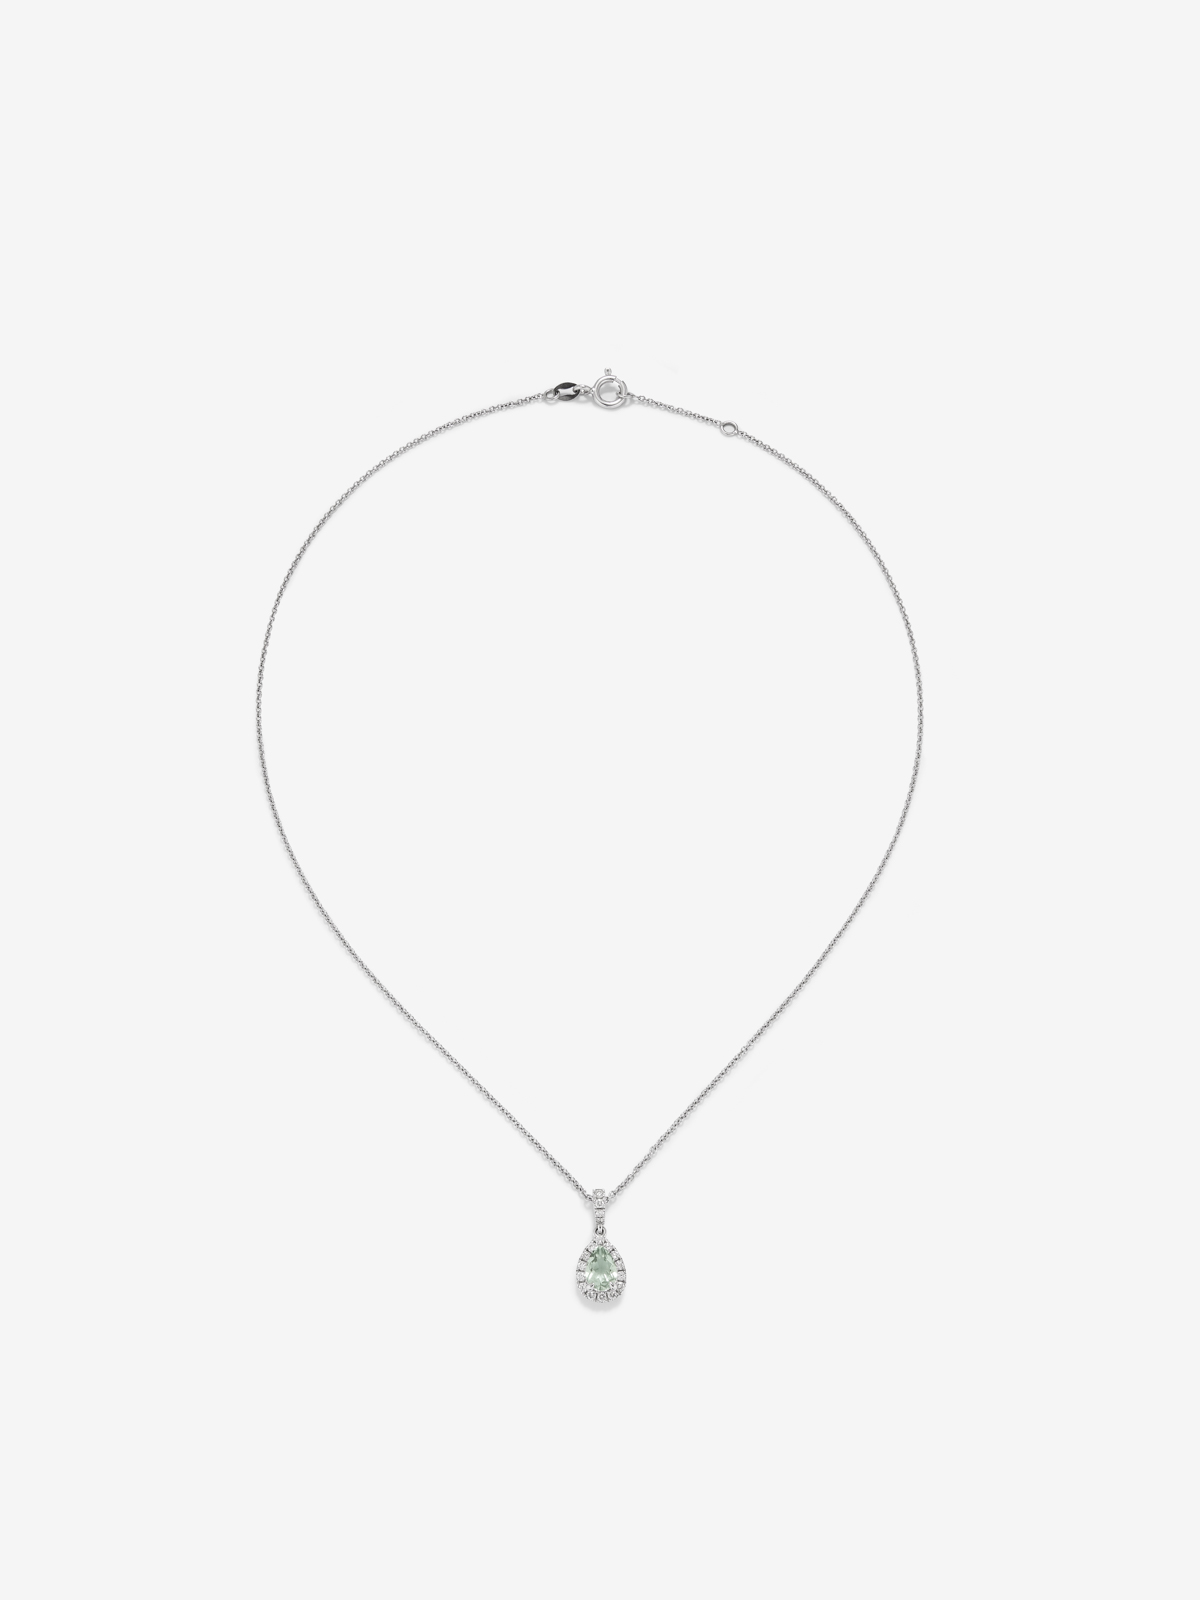 18K white gold pendant chain with green amethyst.